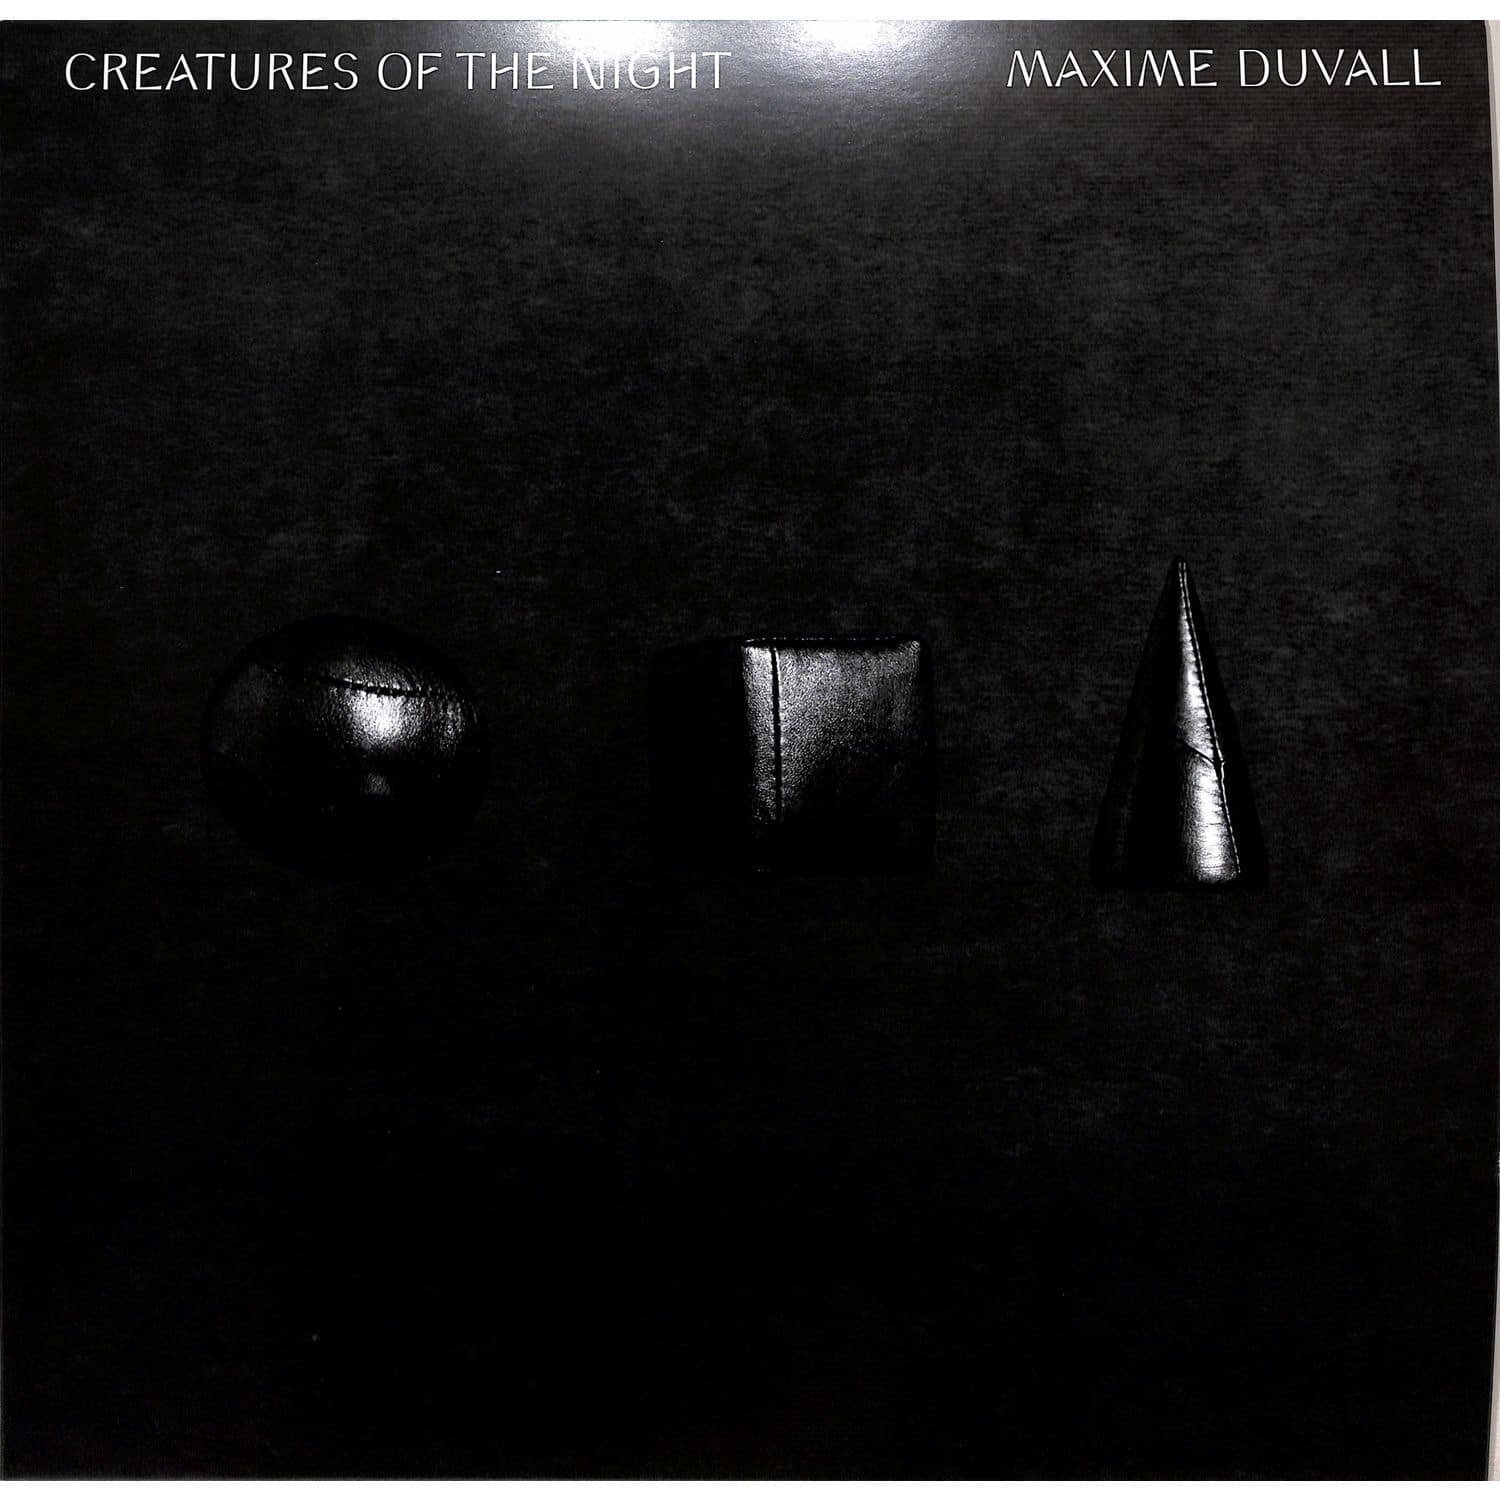 Maxime Duvall - CREATURES OF THE NIGHT